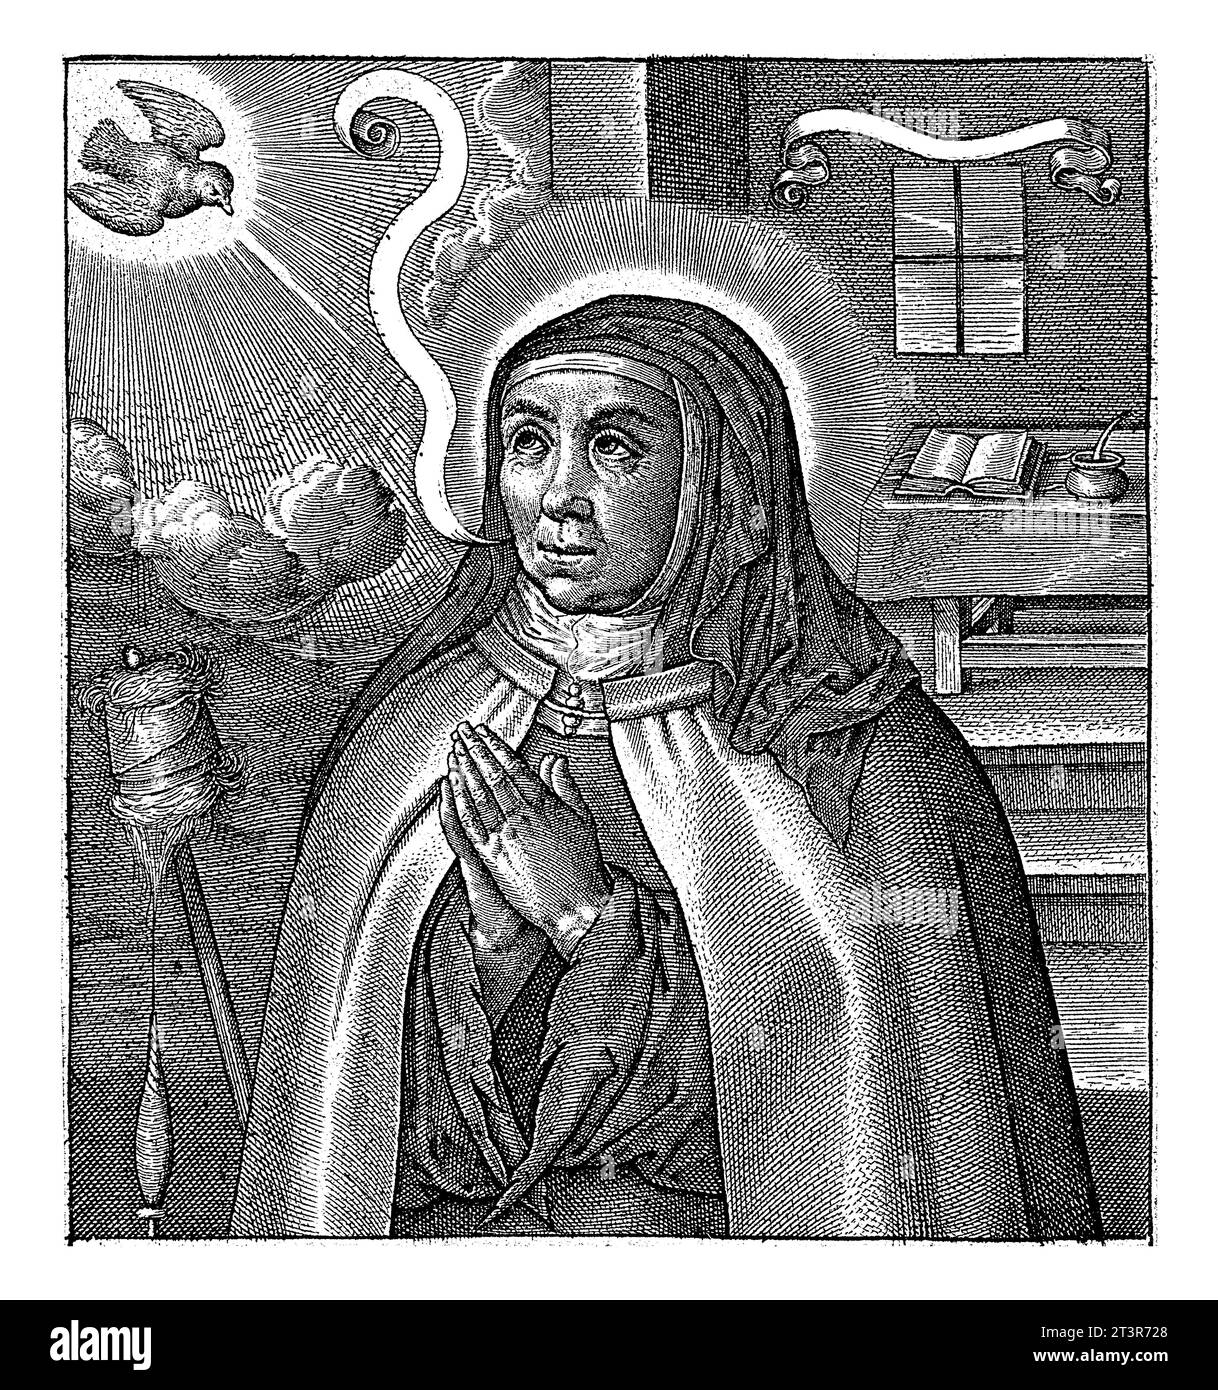 Saint Teresa of Avila, Hieronymus Wierix, 1582 - 1619 Saint Teresa of Avila folded her hands in prayer. Next to her a spider skirt. She looks up at th Stock Photo